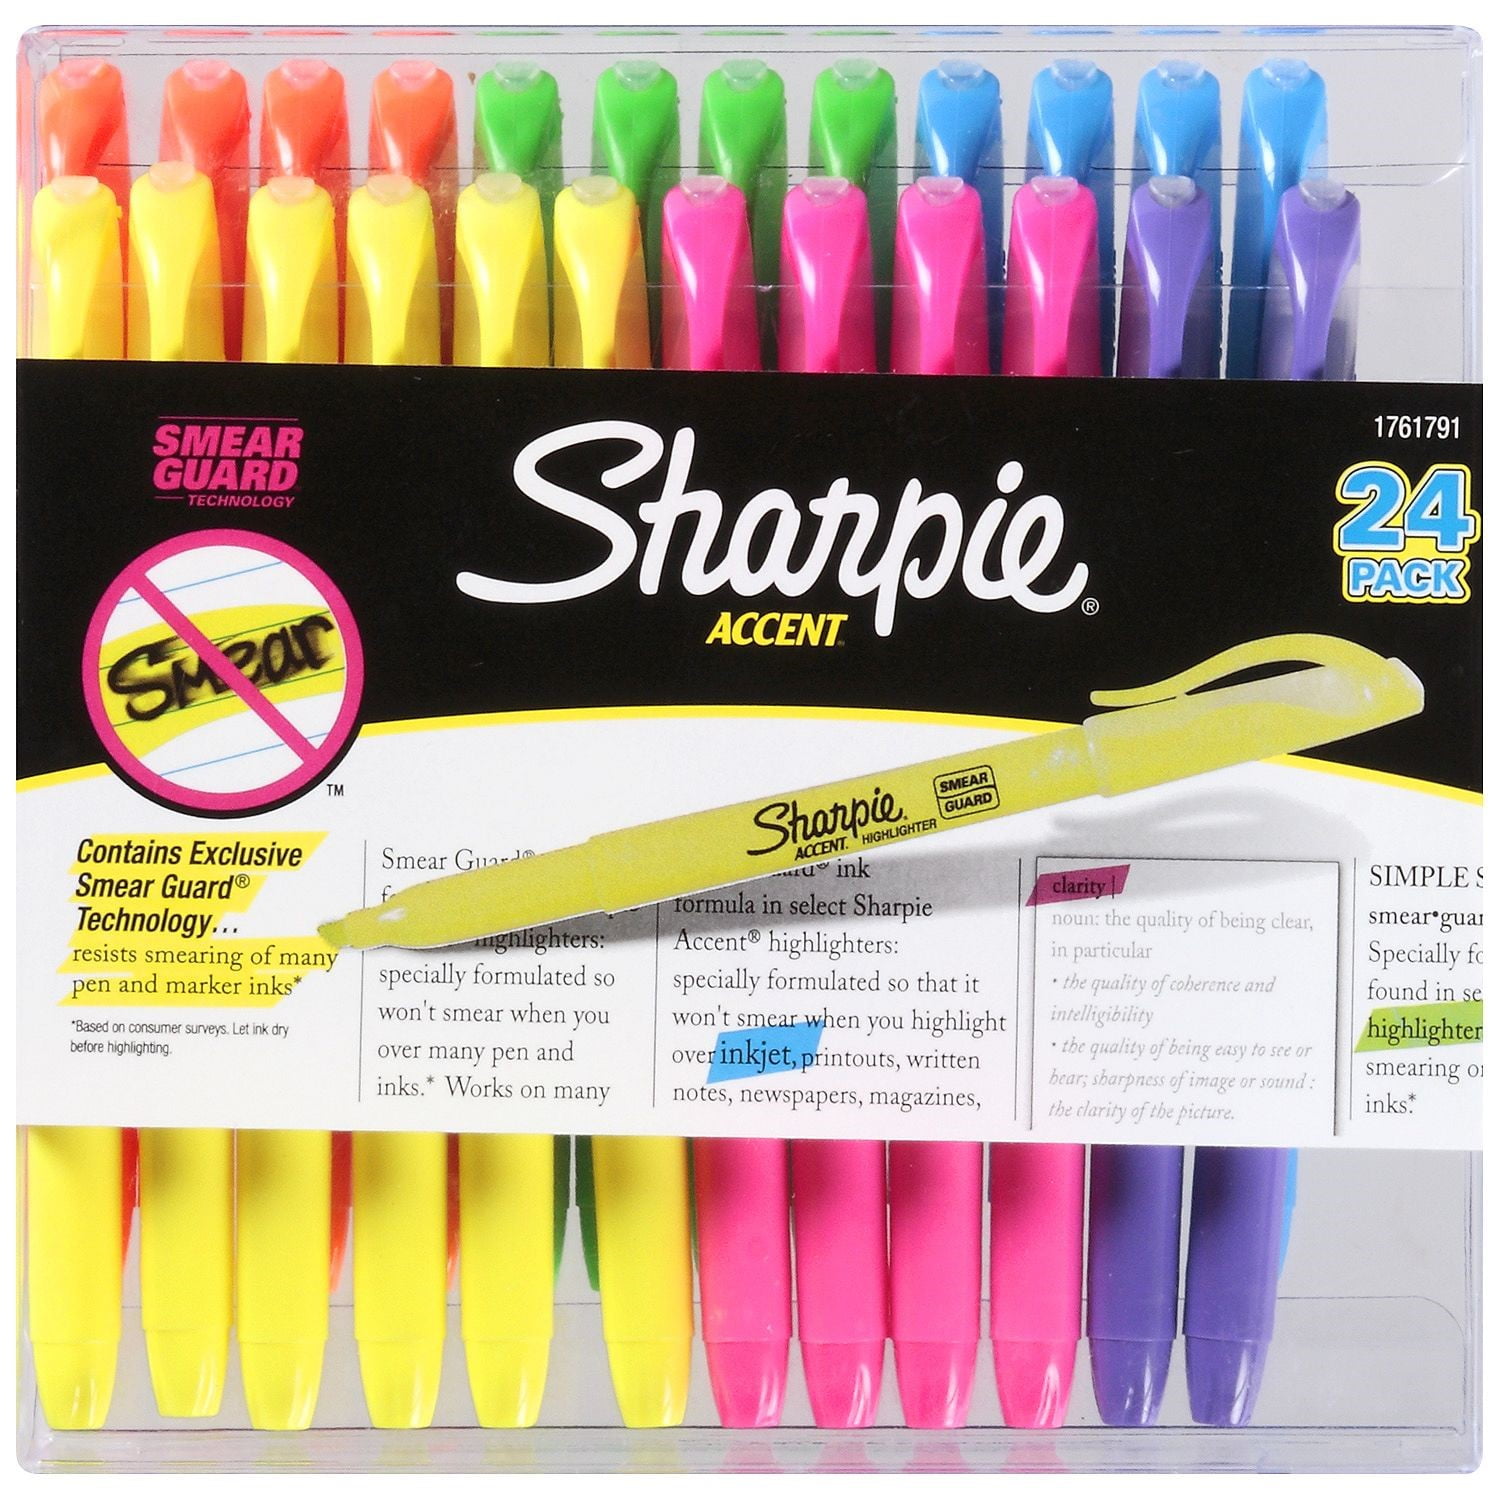 Sharpie Accent Highlighters, Assorted Colors, Chisel Tip, 24 Count -  Walmart.com